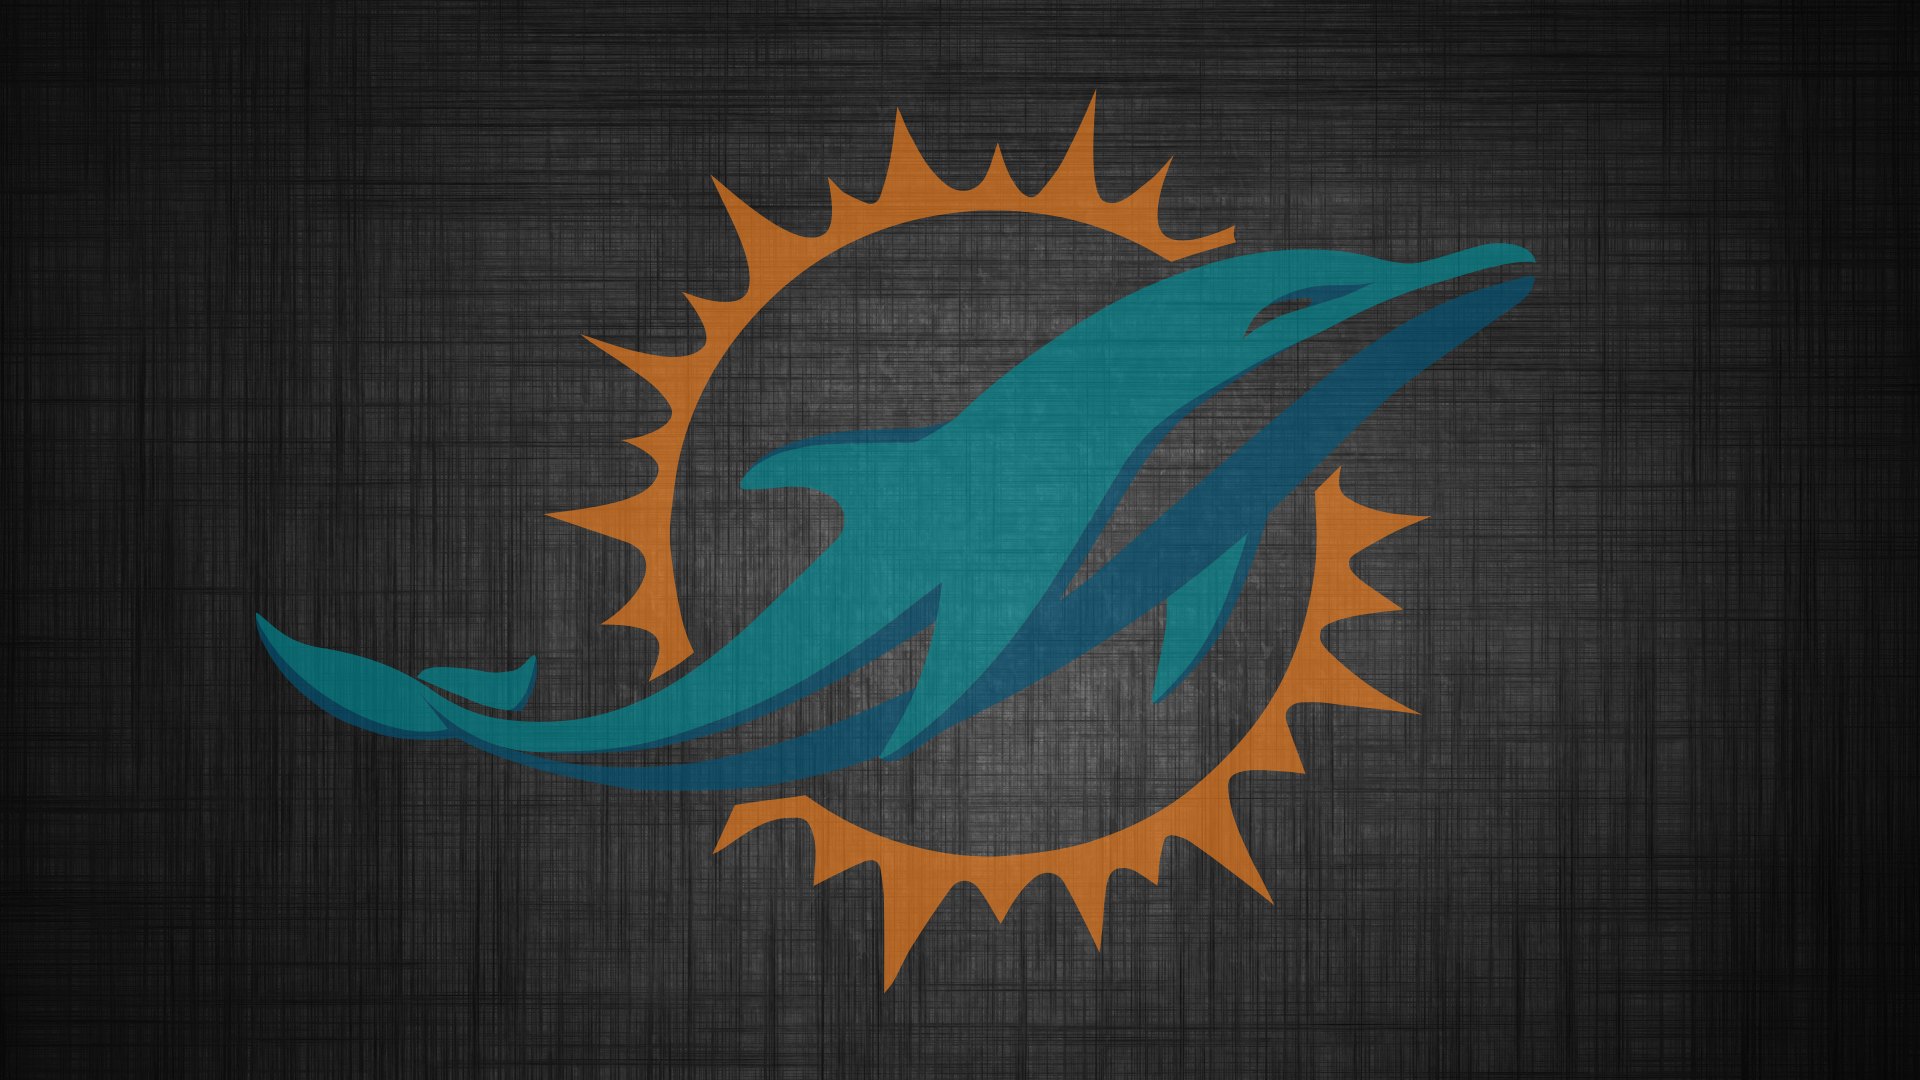 Miami Dolphins Logo Wallpaper - HD Wallpapers 1080p